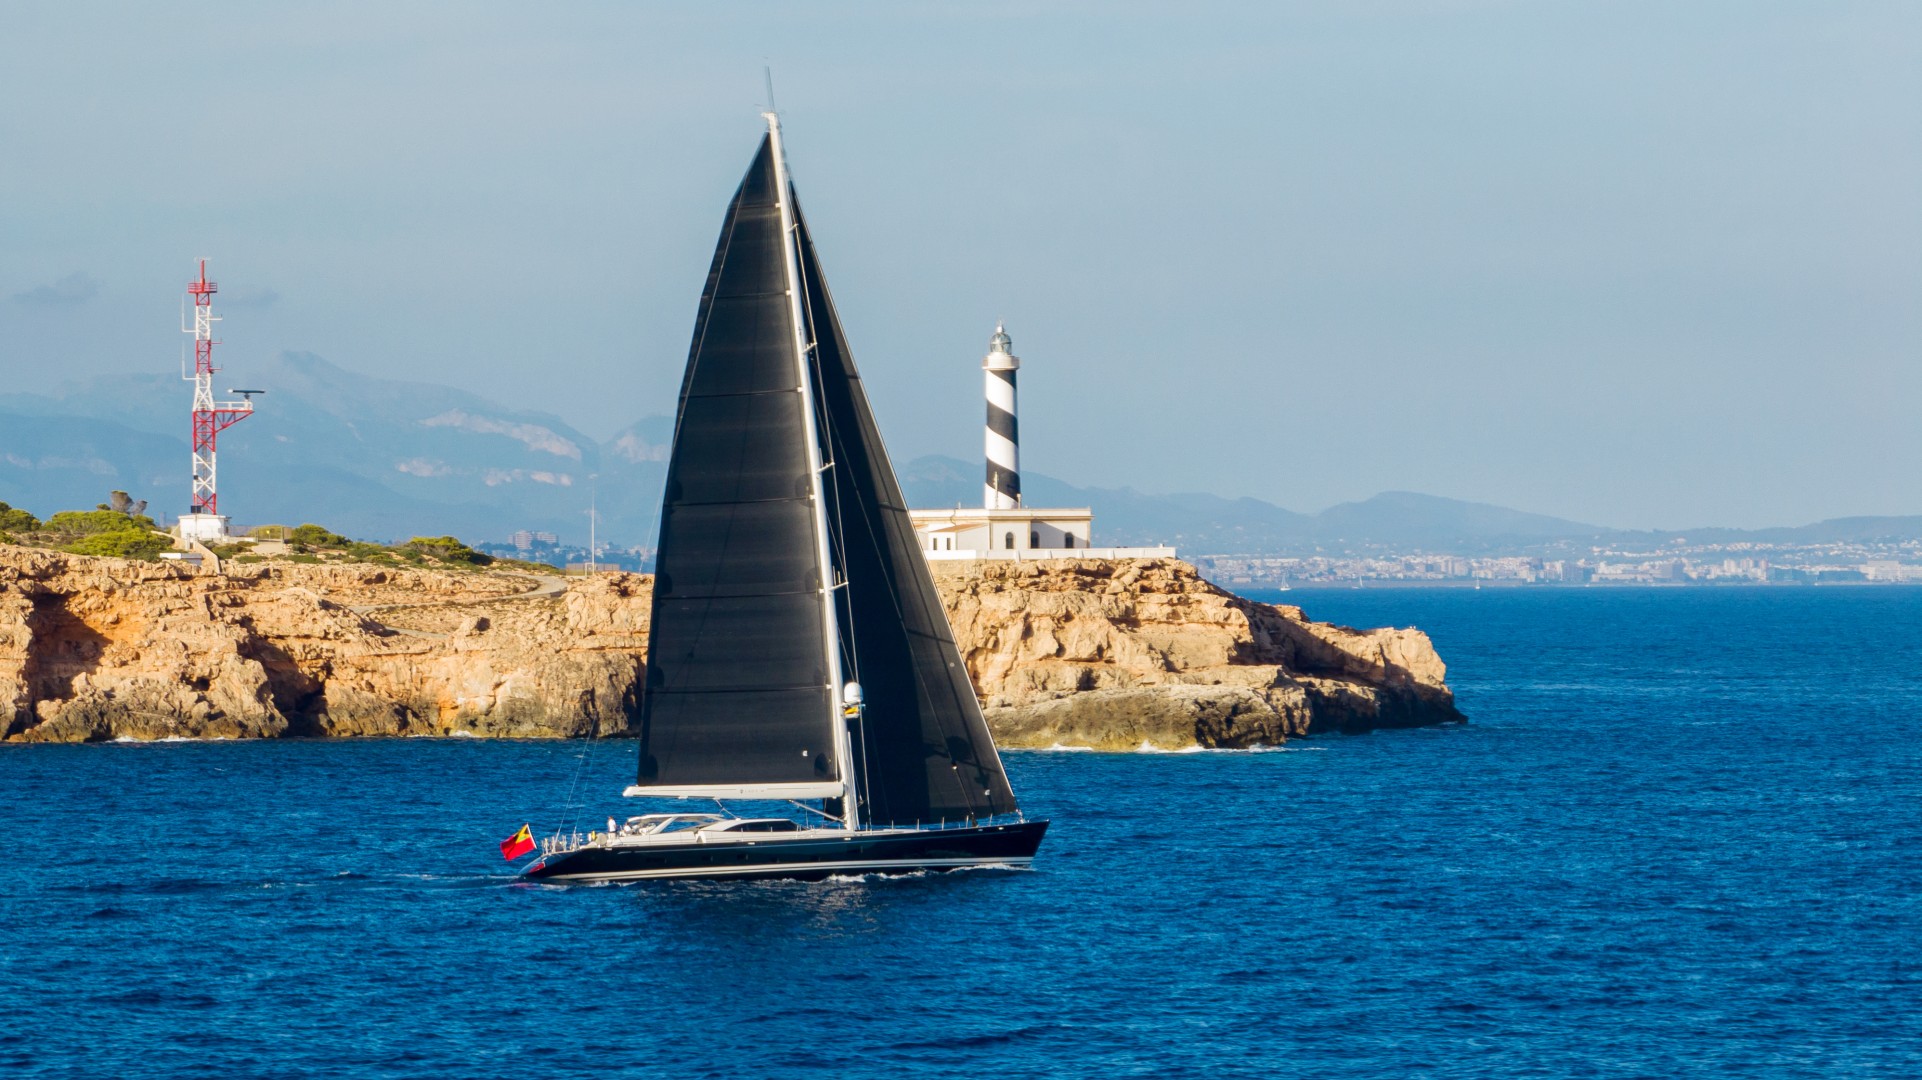 Countdown to Superyacht Cup Palma 2023 is well underway